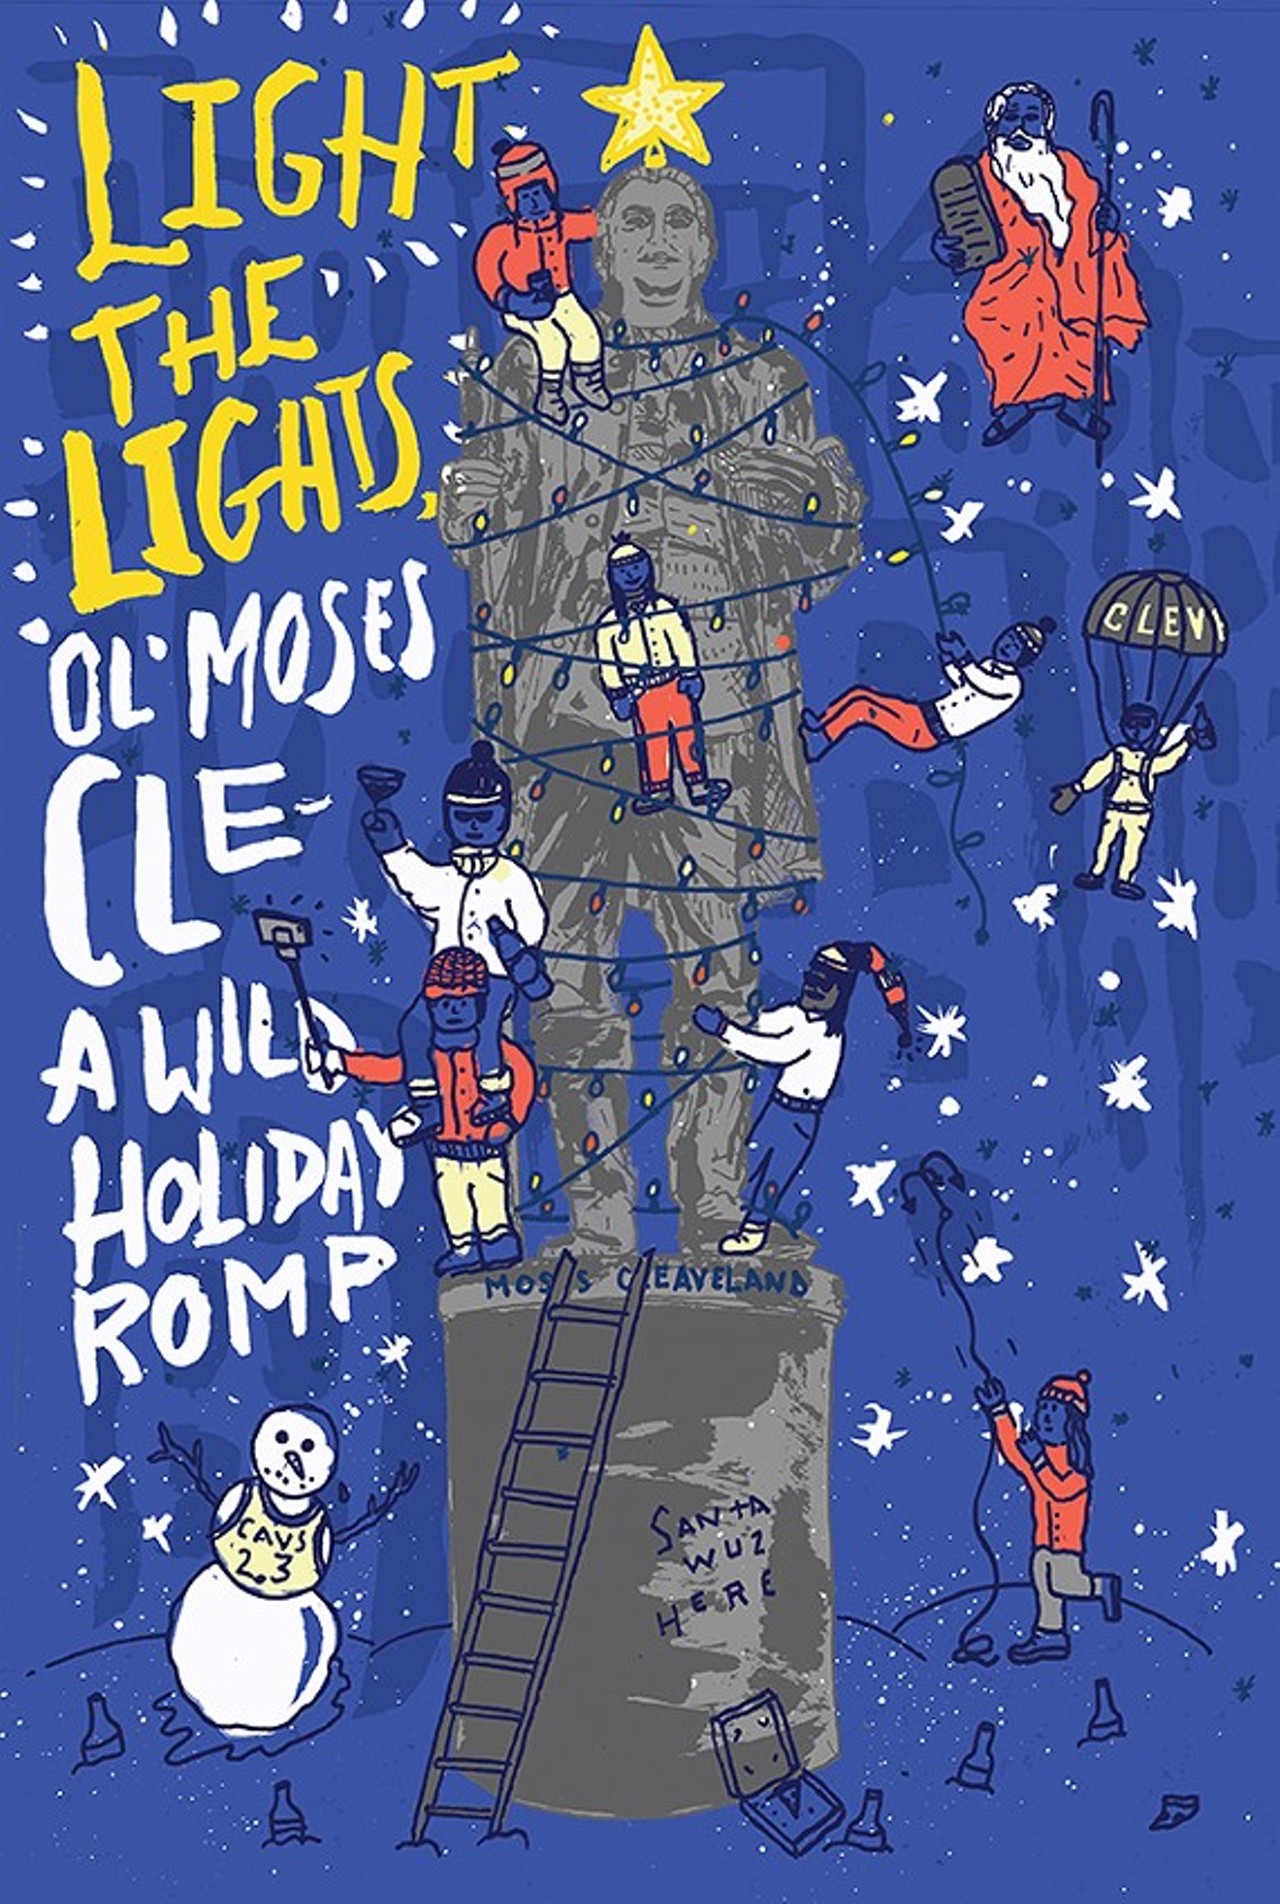 Light the Lights, Ol' Moses Cle (A Wild Holiday Romp) 
When: Thursdays-Sundays, 7:30-10 p.m. Continues through Dec. 18
Phone: 216-631-2727 
Email: tpavlich@cptonline.org 
Price: $20-40 
www.cptonline.org
Ring in the season CPT-style with a vaudeville-inspired evening of holiday folly, mischief and merry-making. Staged in the round at cabaret tables in CPT&#146;s historic Gordon Square Theatre, the show will feature a rollicking evening of holiday-themed vignettes, live music and larger-than-life antics by an assorted cast of characters. (Photo courtesy Light the Lights/Facebook)